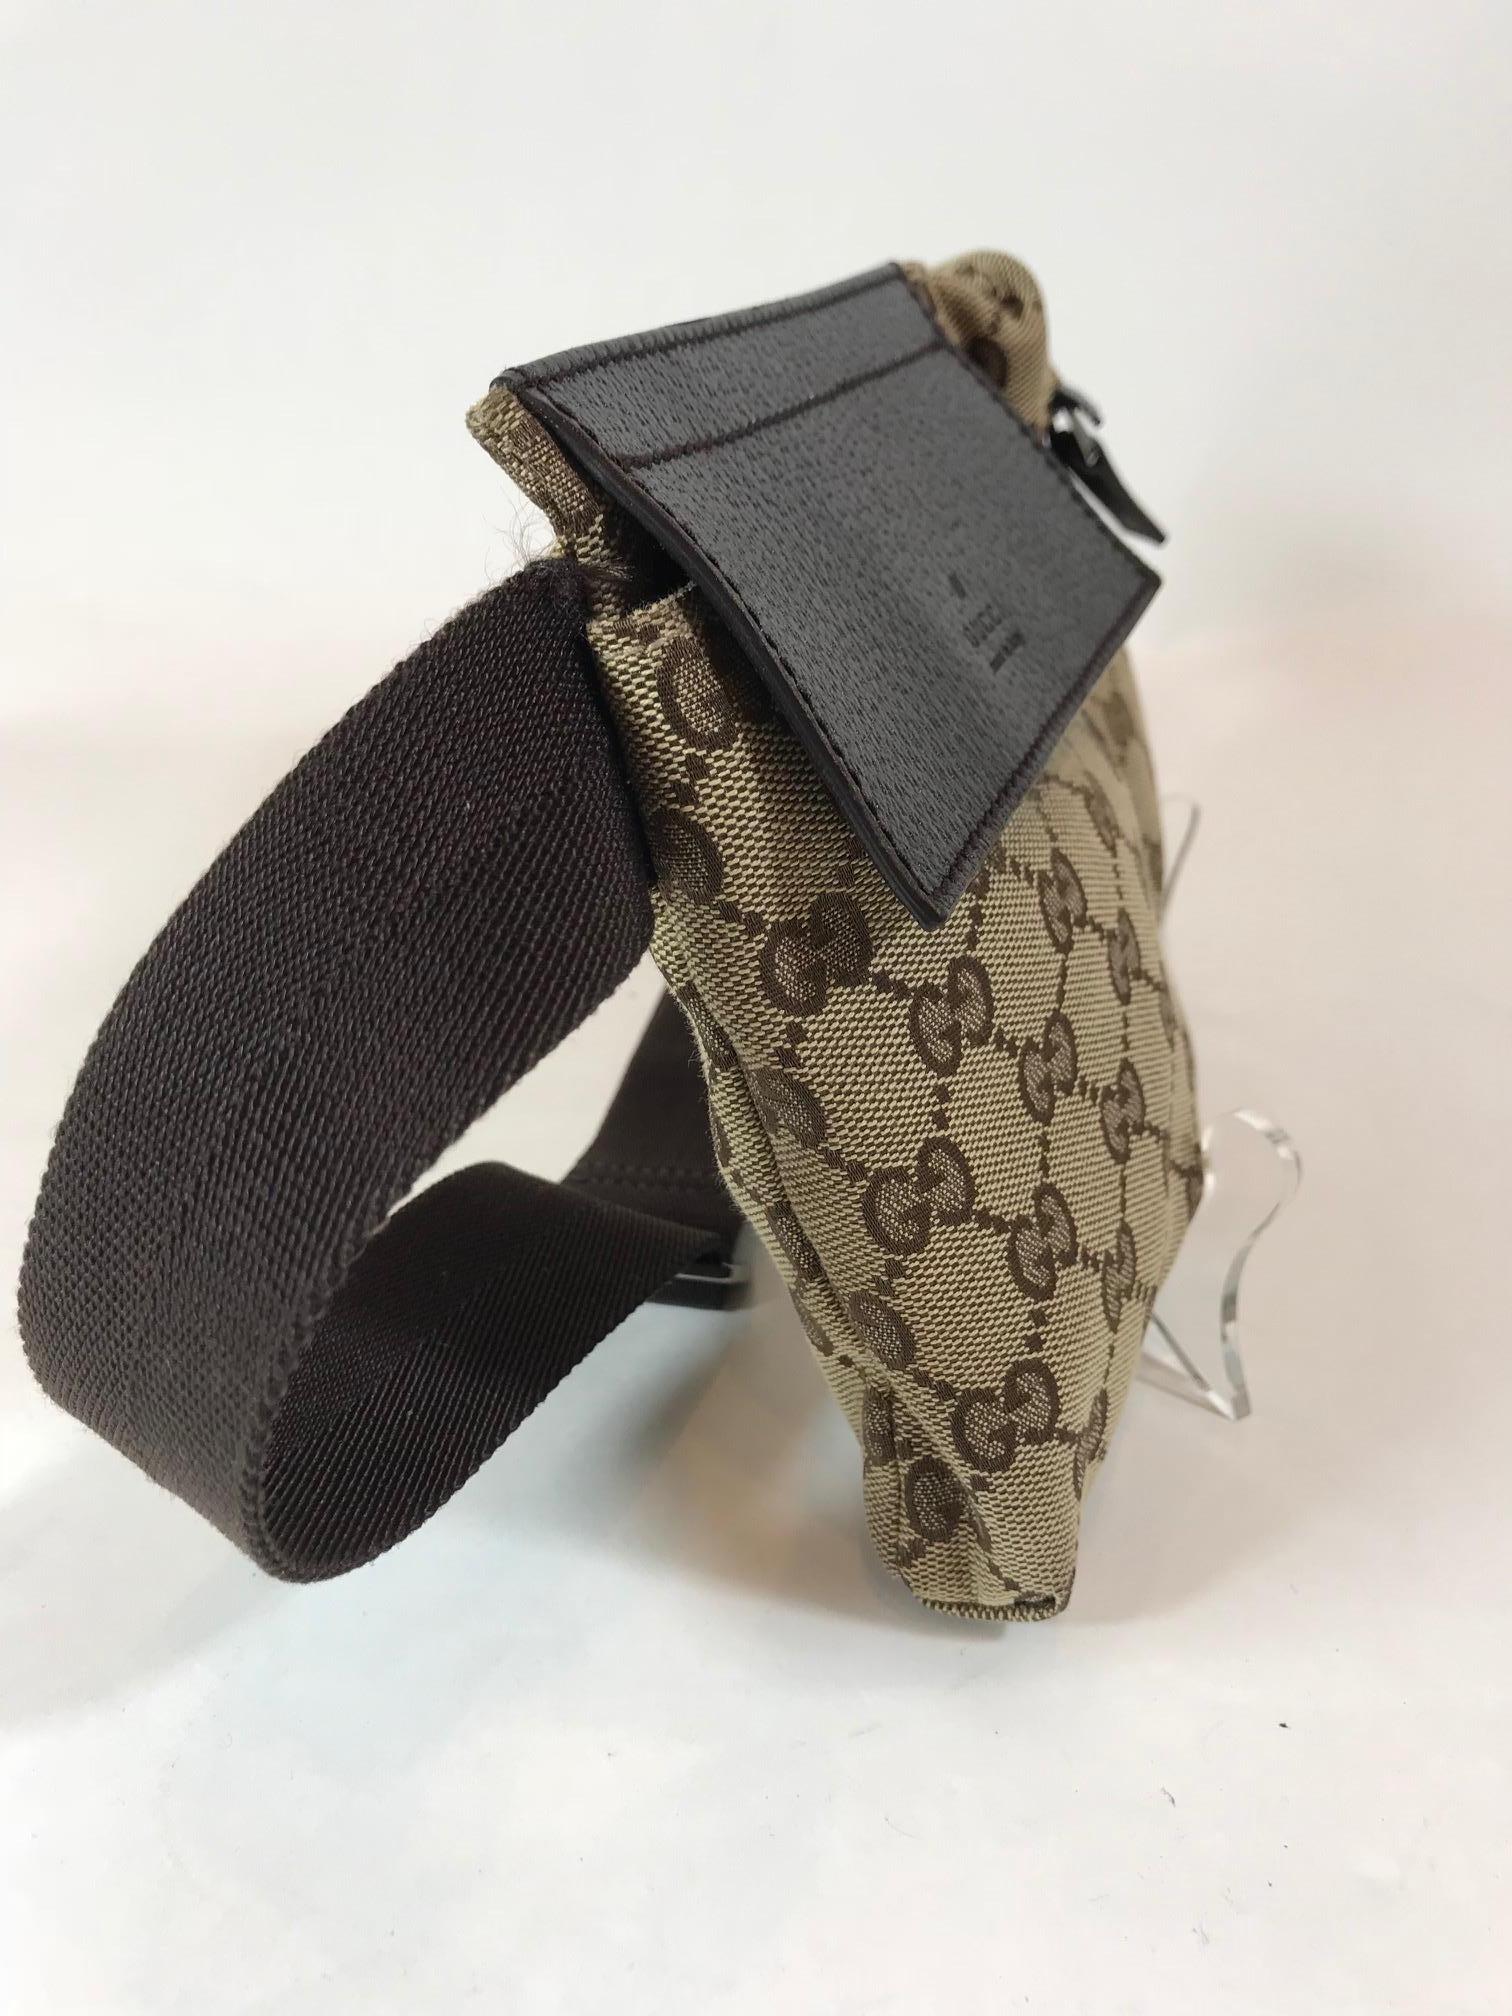 Beige and brown GG canvas Gucci waist bag with gunmetal hardware, single canvas waist strap with buckle closure, chocolate leather trim, dual exterior pockets; one with zip closure, chocolate woven lining and zip closure at back.